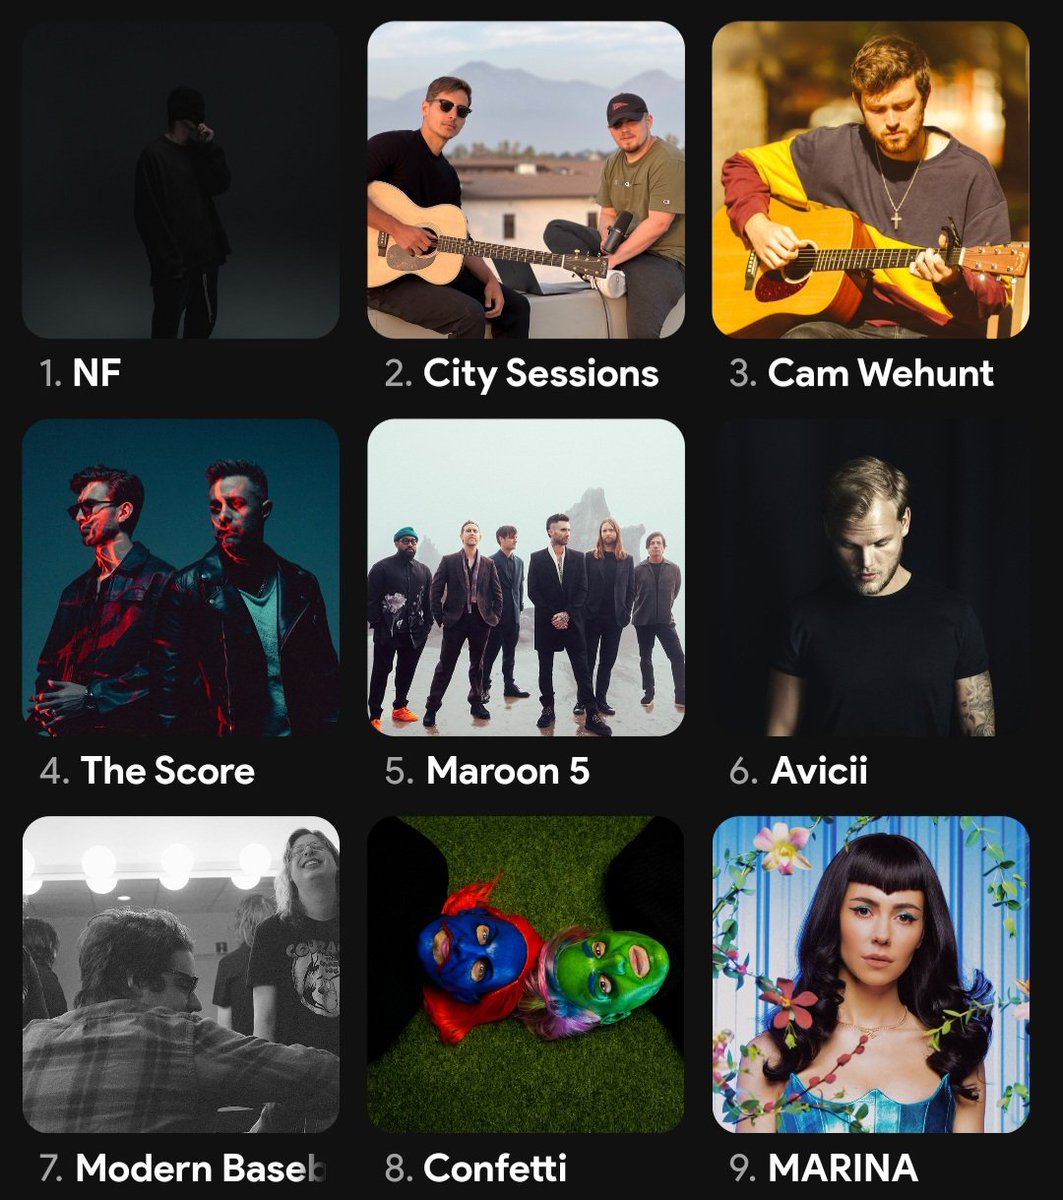 here are my top 9 favorite artists #NF #music #artists #song #great #greatartists